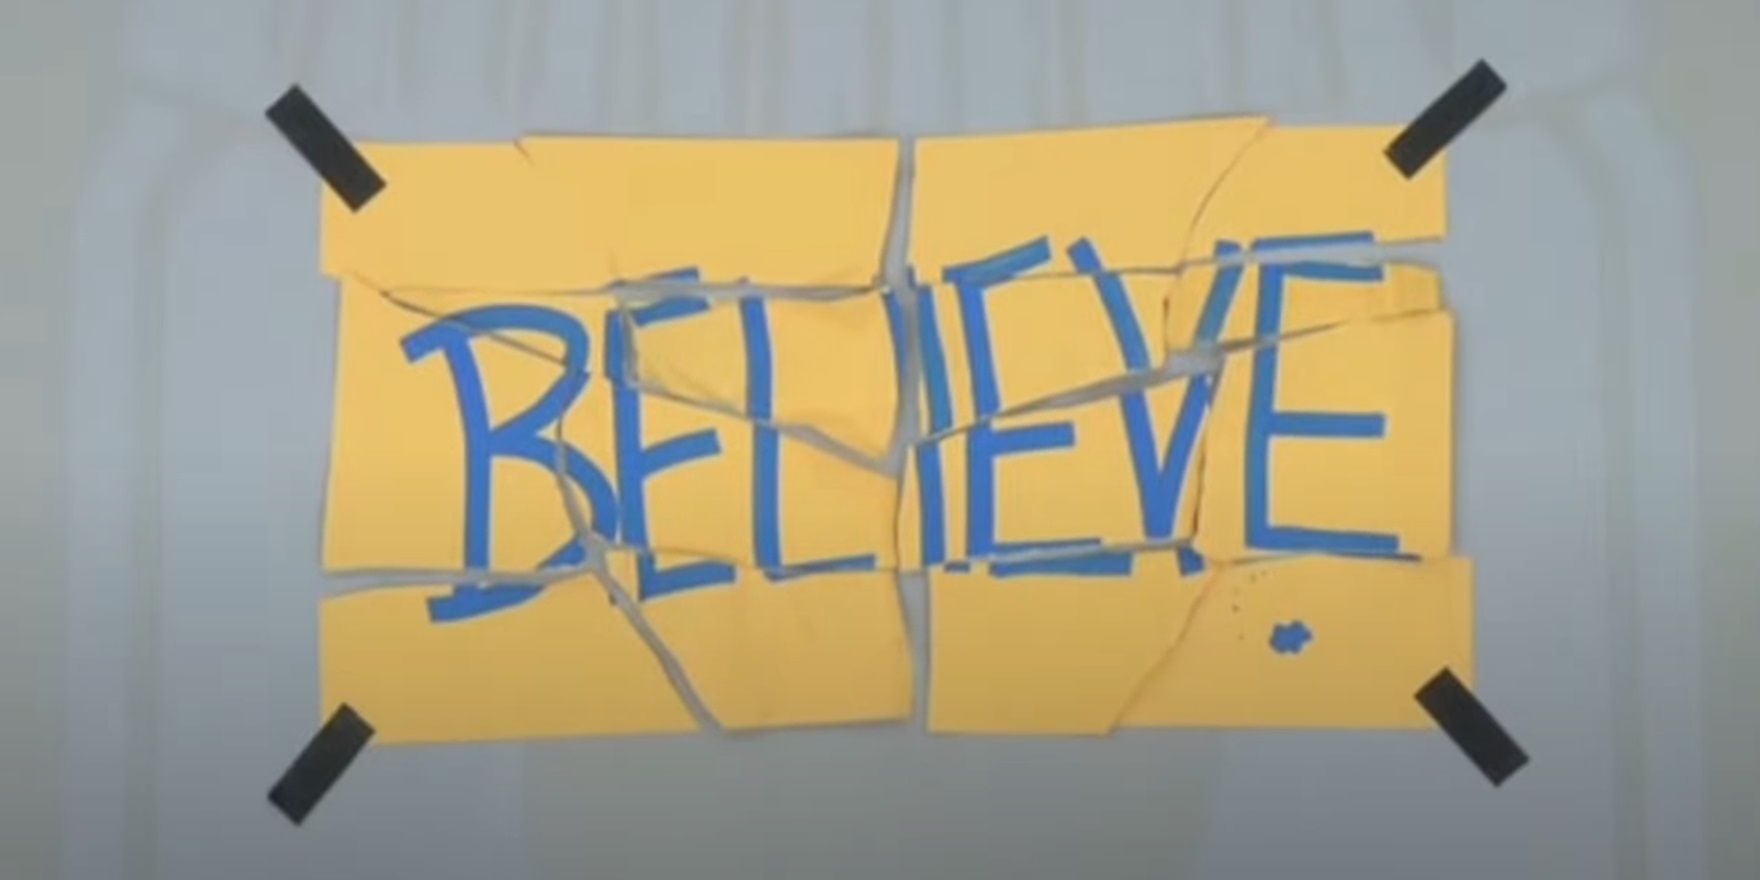 The repaired Believe sign in Ted Lasso